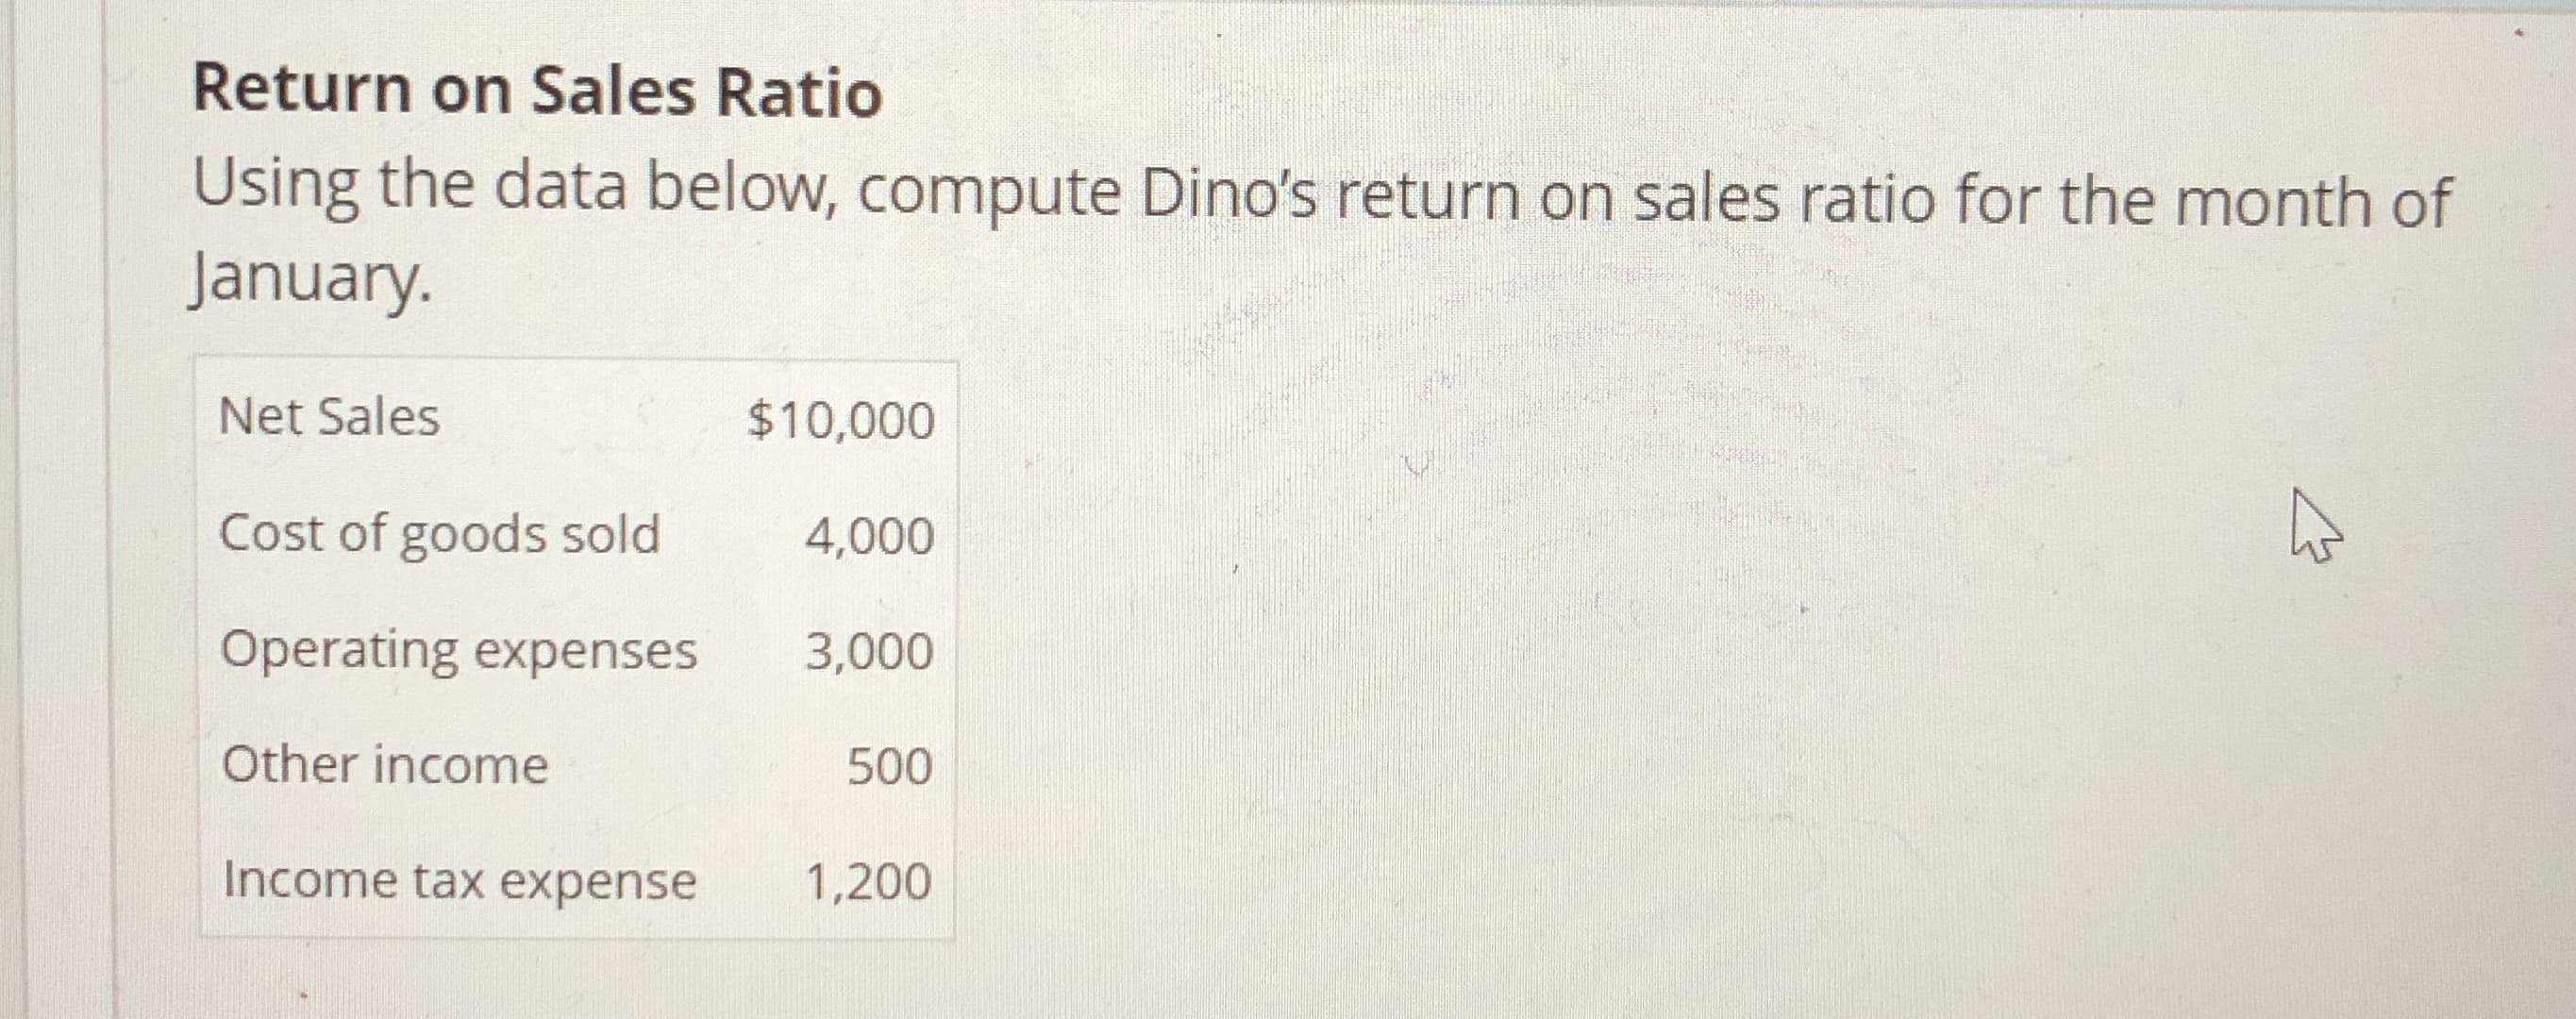 Return on Sales Ratio
Using the data below, compute Dino's return on sales ratio for the month of
January.
Net Sales
Cost of goods sold
Operating expenses
Other income
Income tax expense
$10,000
4,000
3,000
5001
1,200
